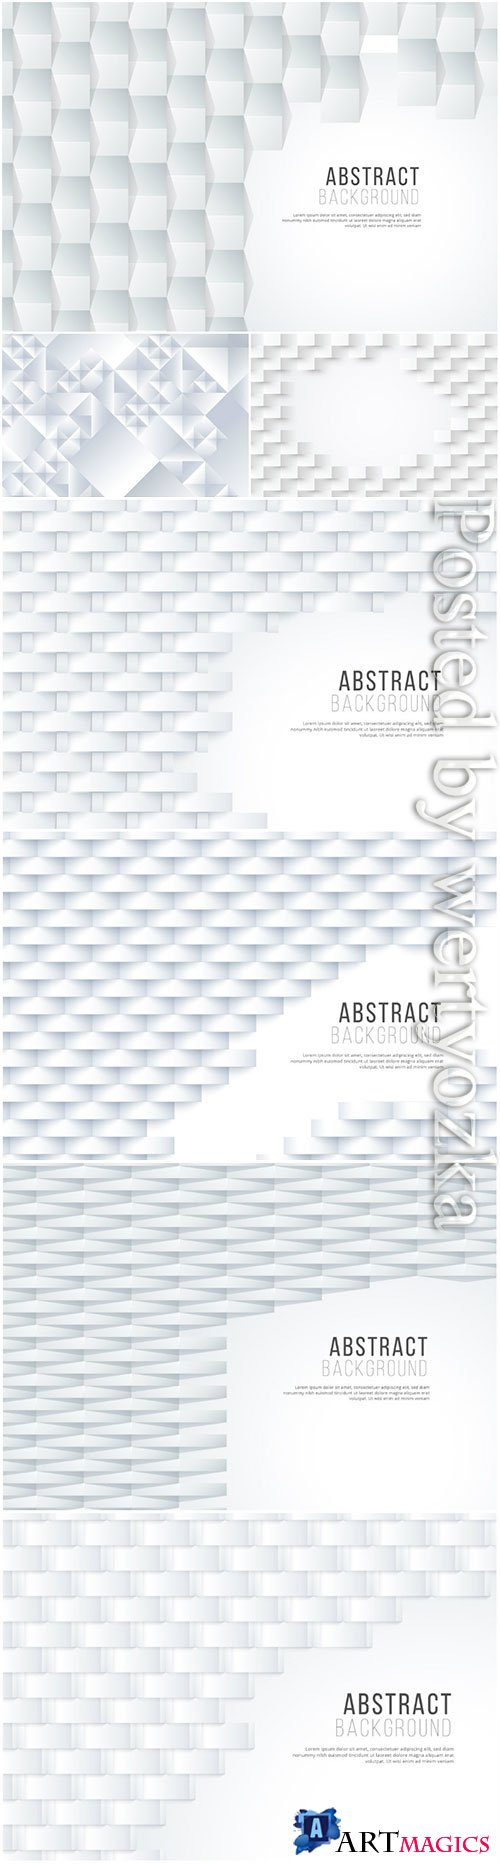 3d vector background with white abstract elements